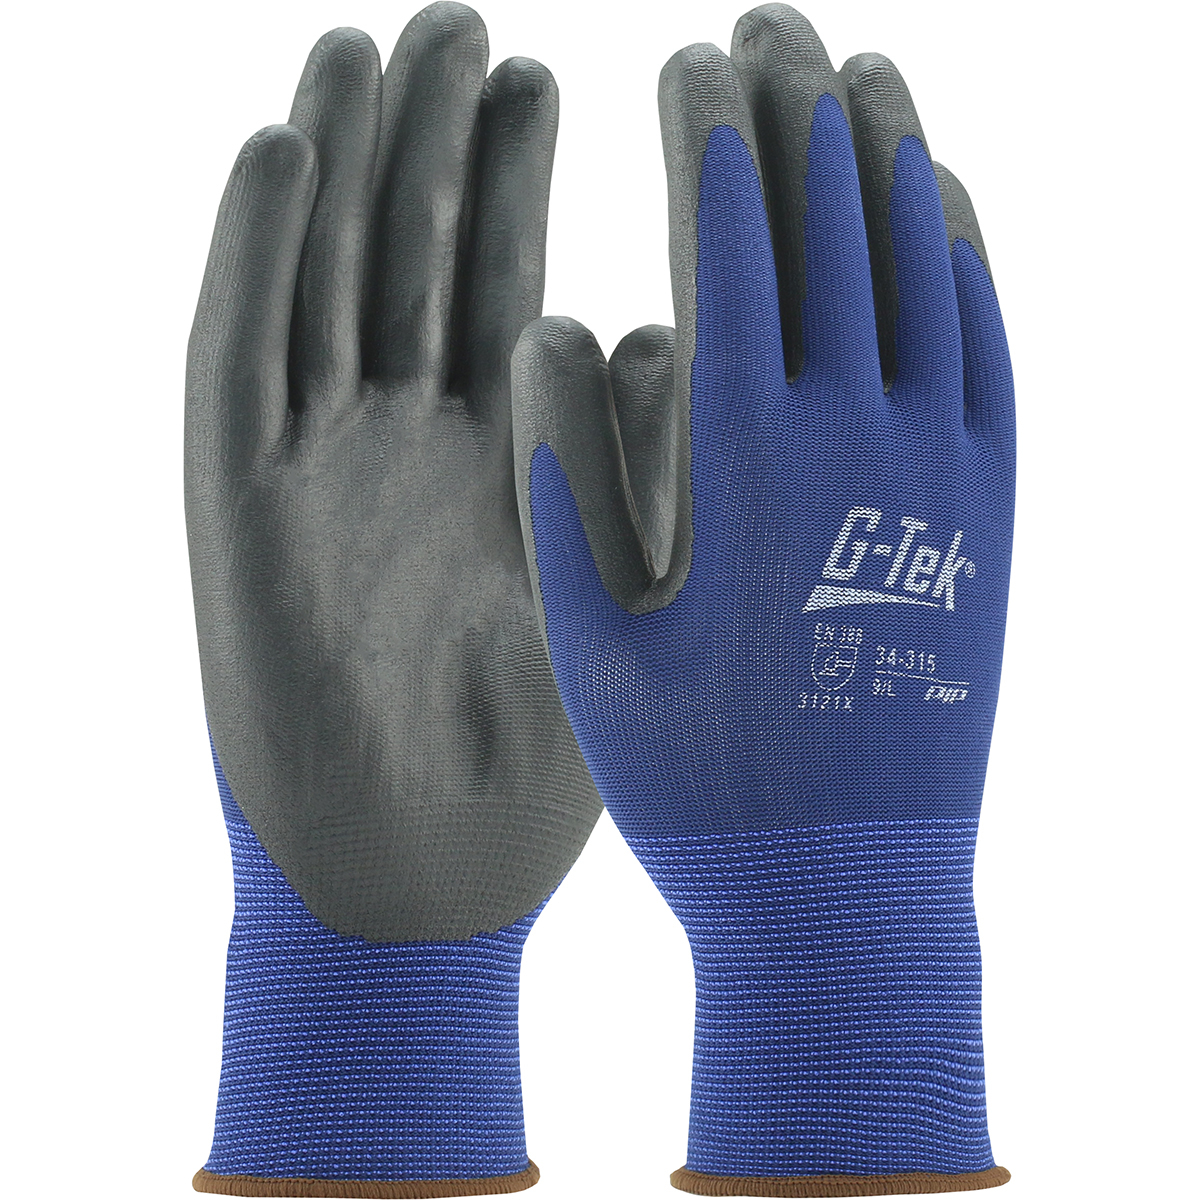 #34-315 PIP® G-Tek® Seamless Knit Polyester Glove with Nitrile Coated Foam Grip on Palm & Fingers - 15 Gauge